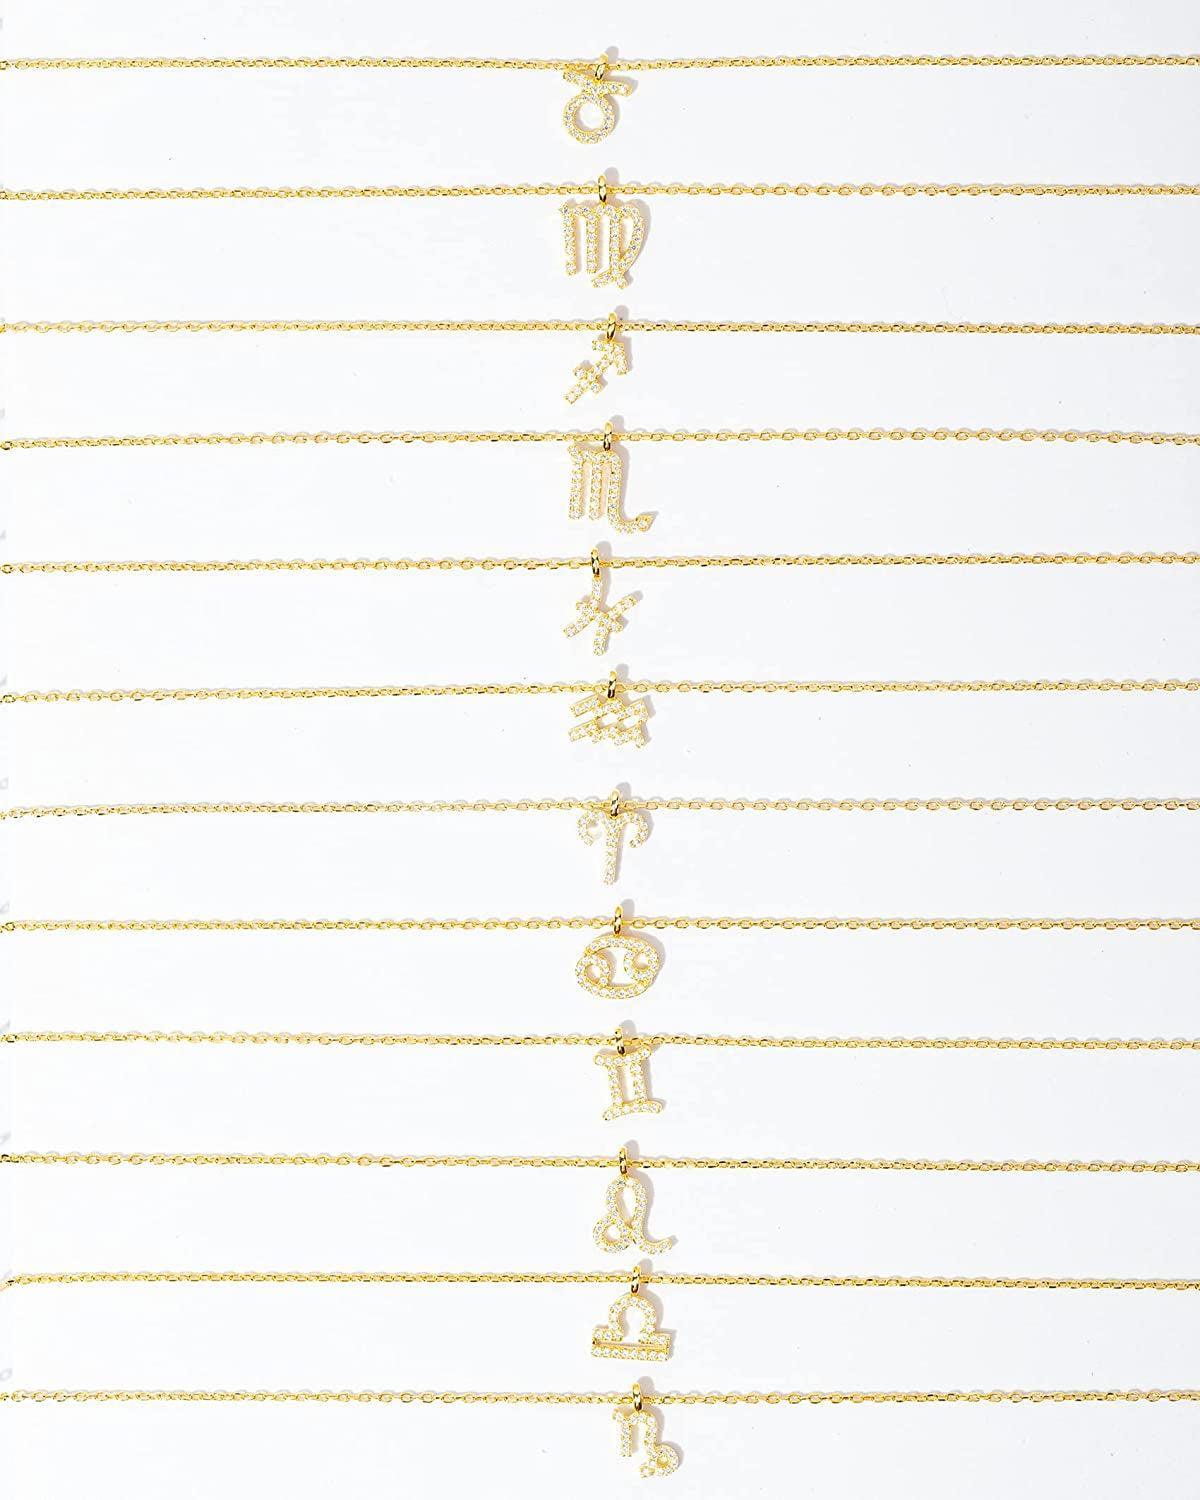 Astrology Necklace Mabel Love Co